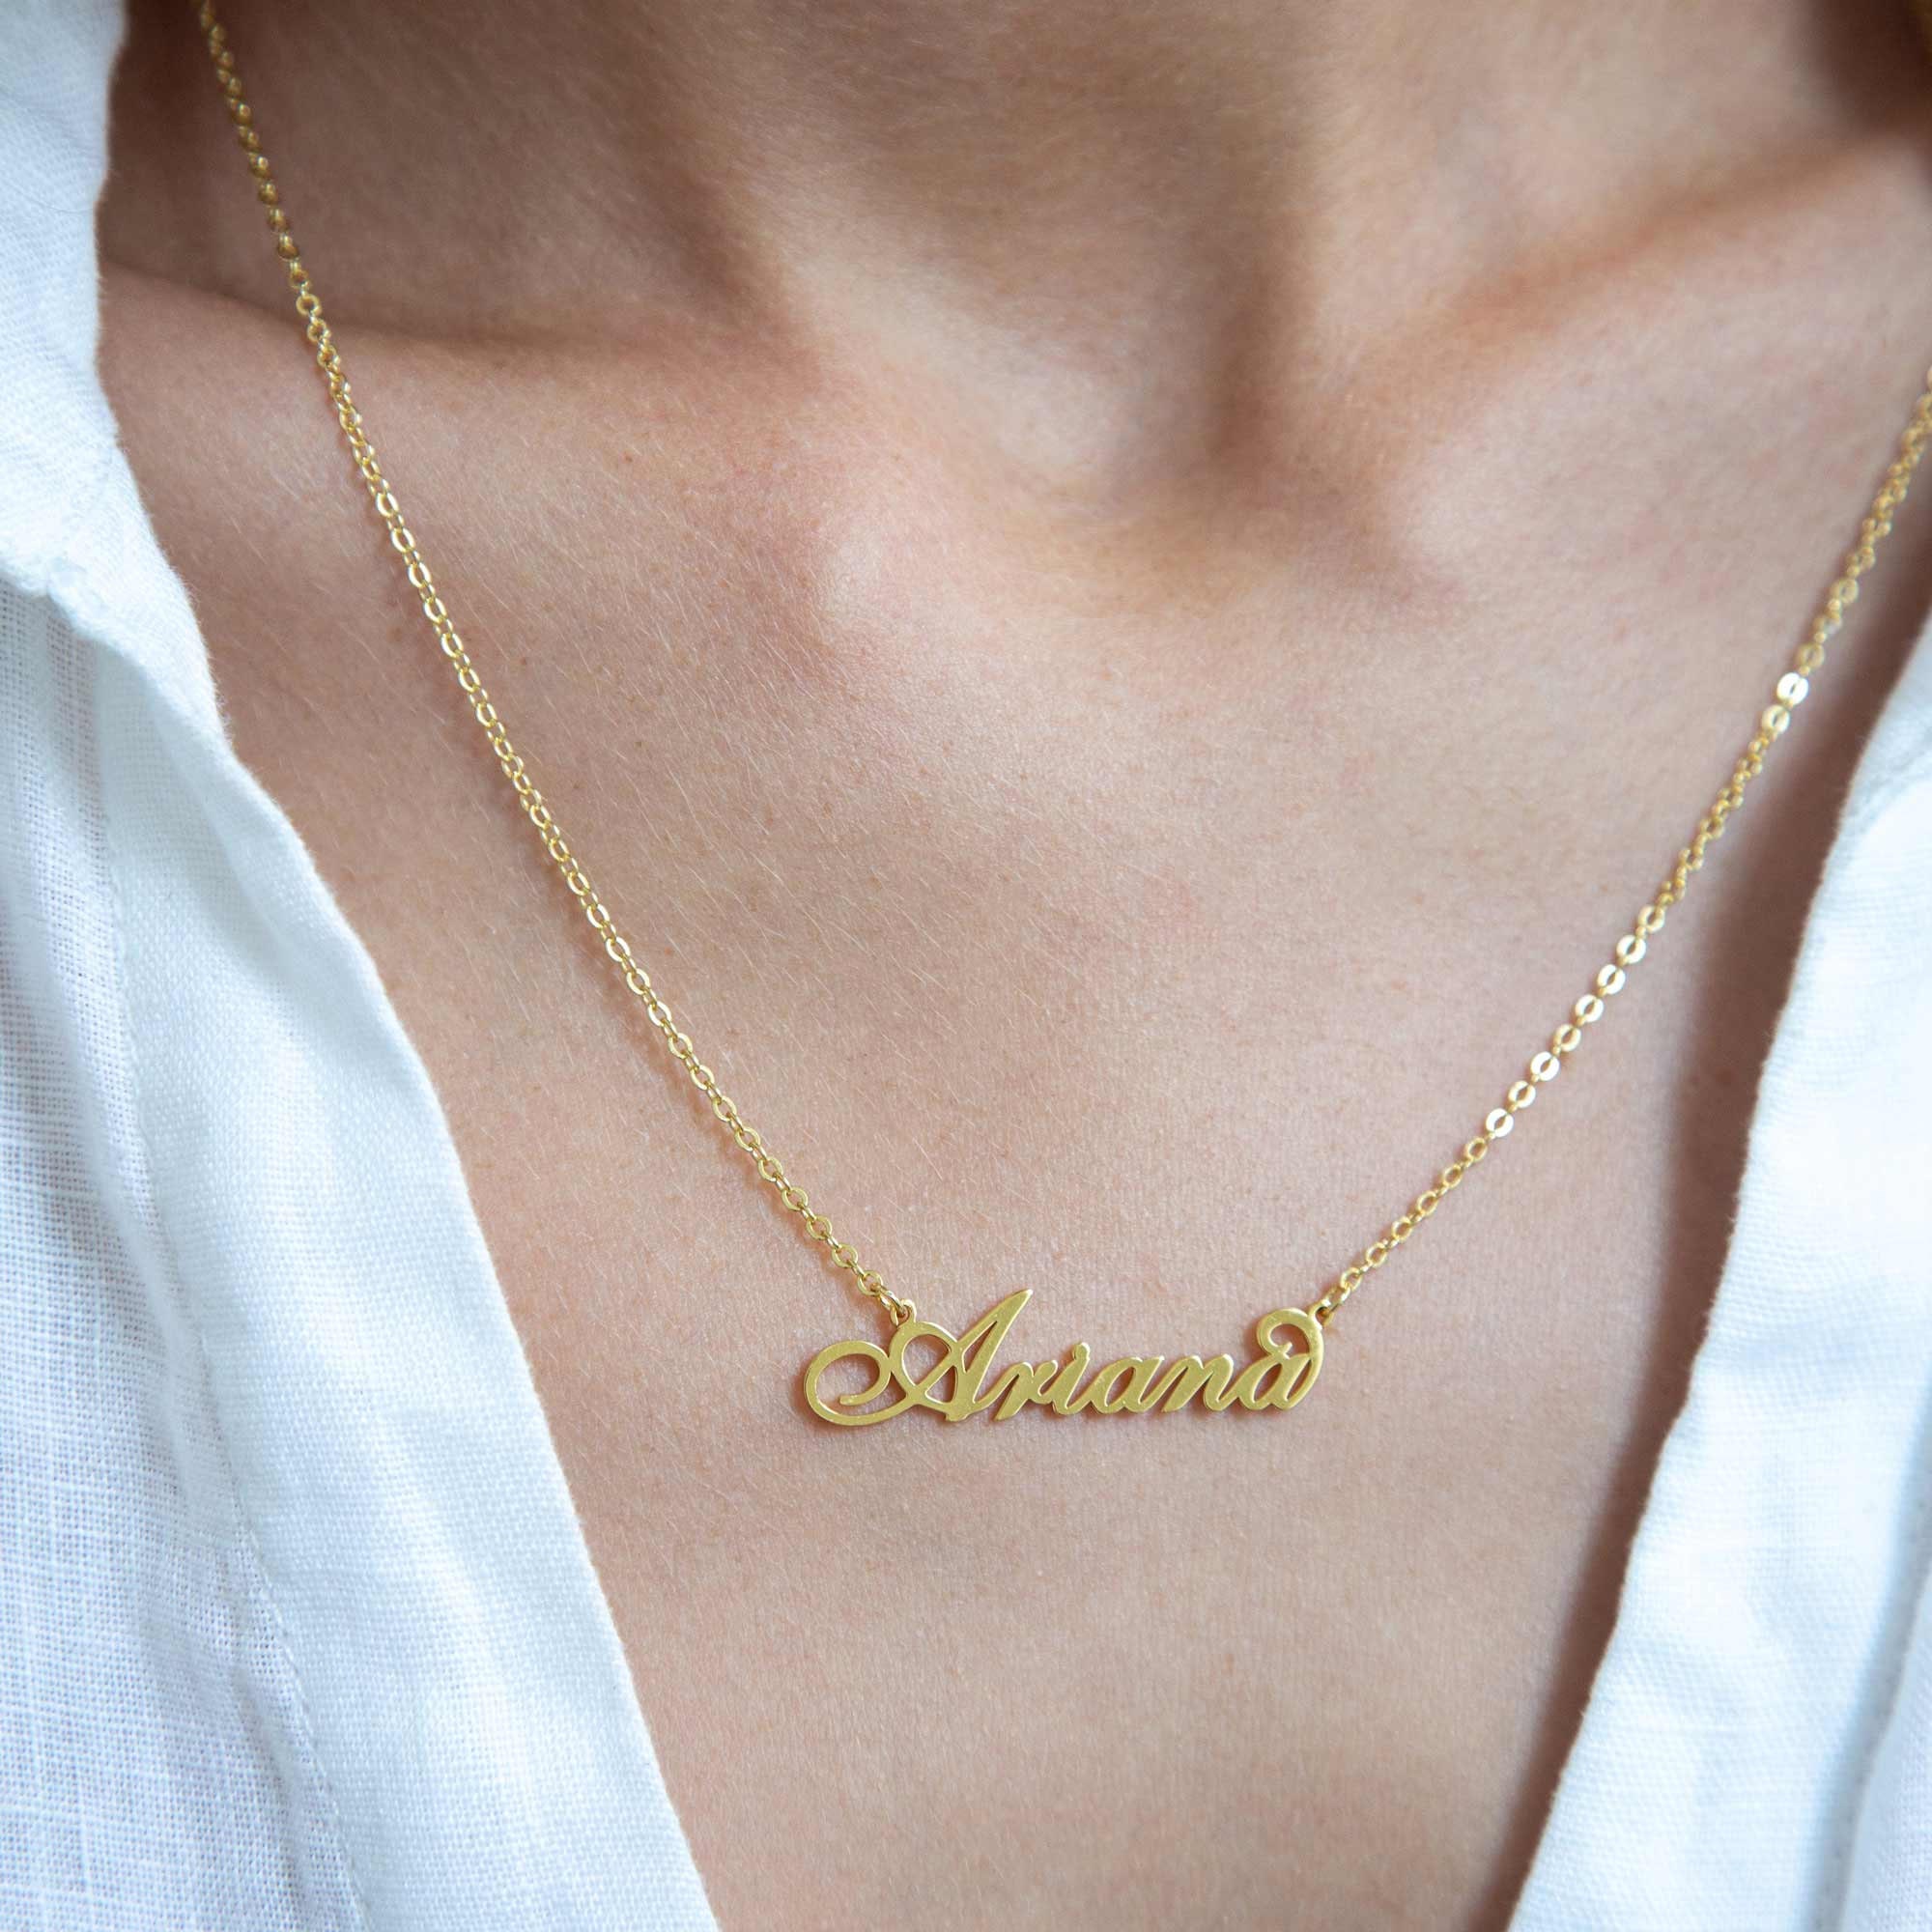  TSD 10K Rose Gold Personalized Name Necklace with a 16